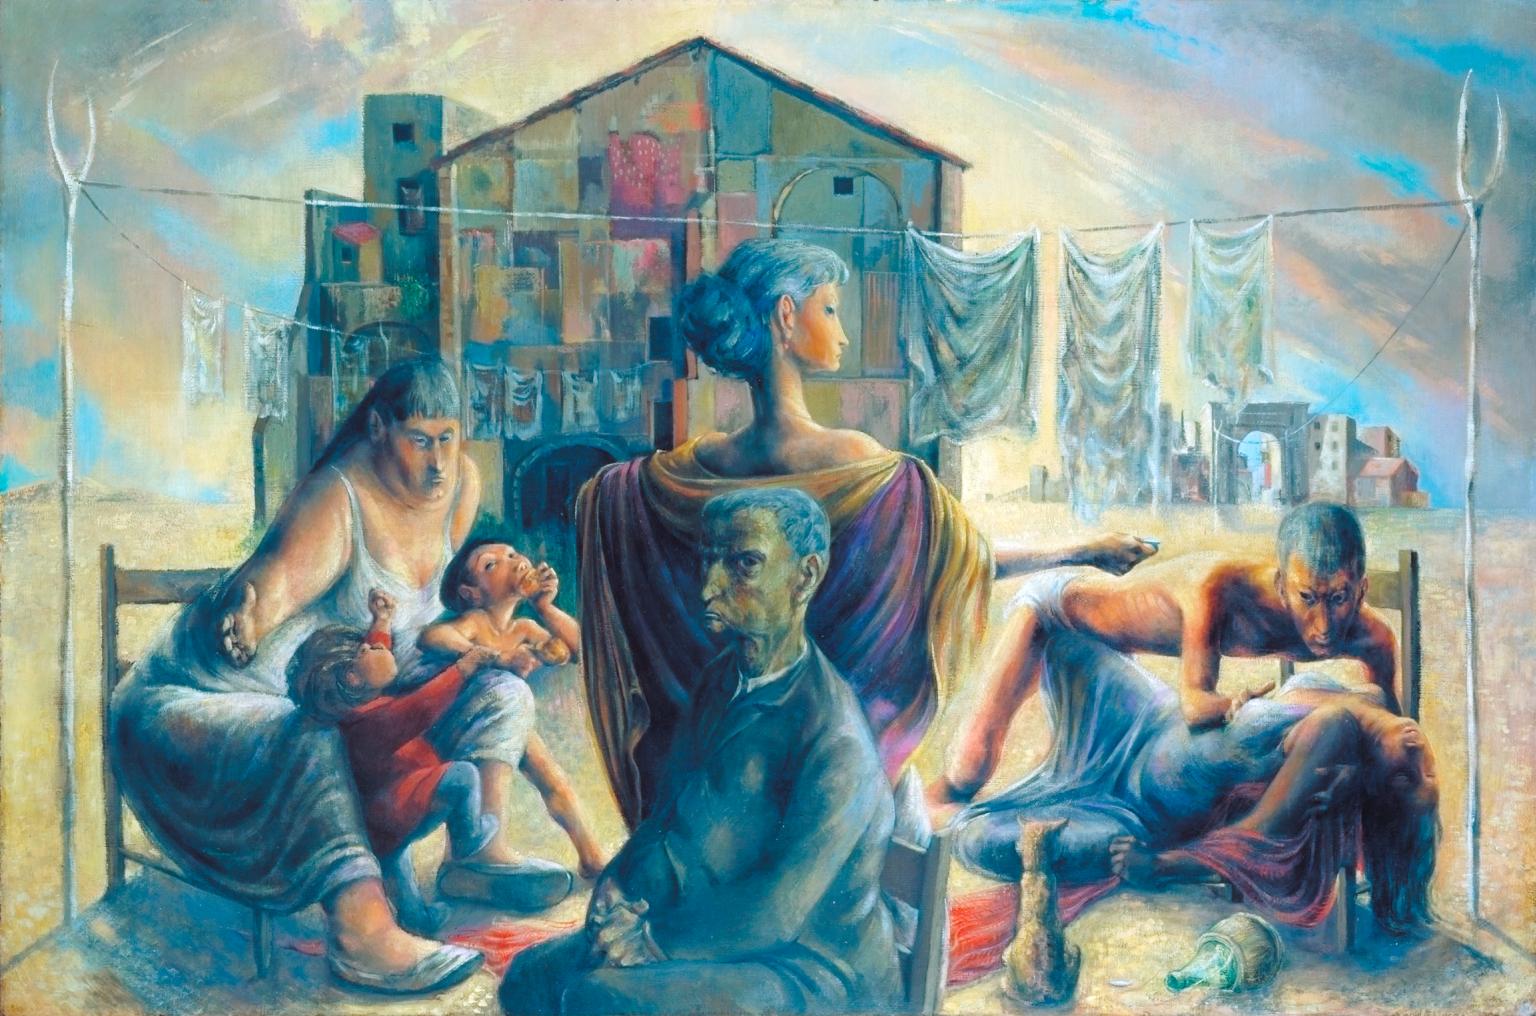 The Captive Seven (1949-50) by Michael Ayrton (1921-1975) Tate Gallery